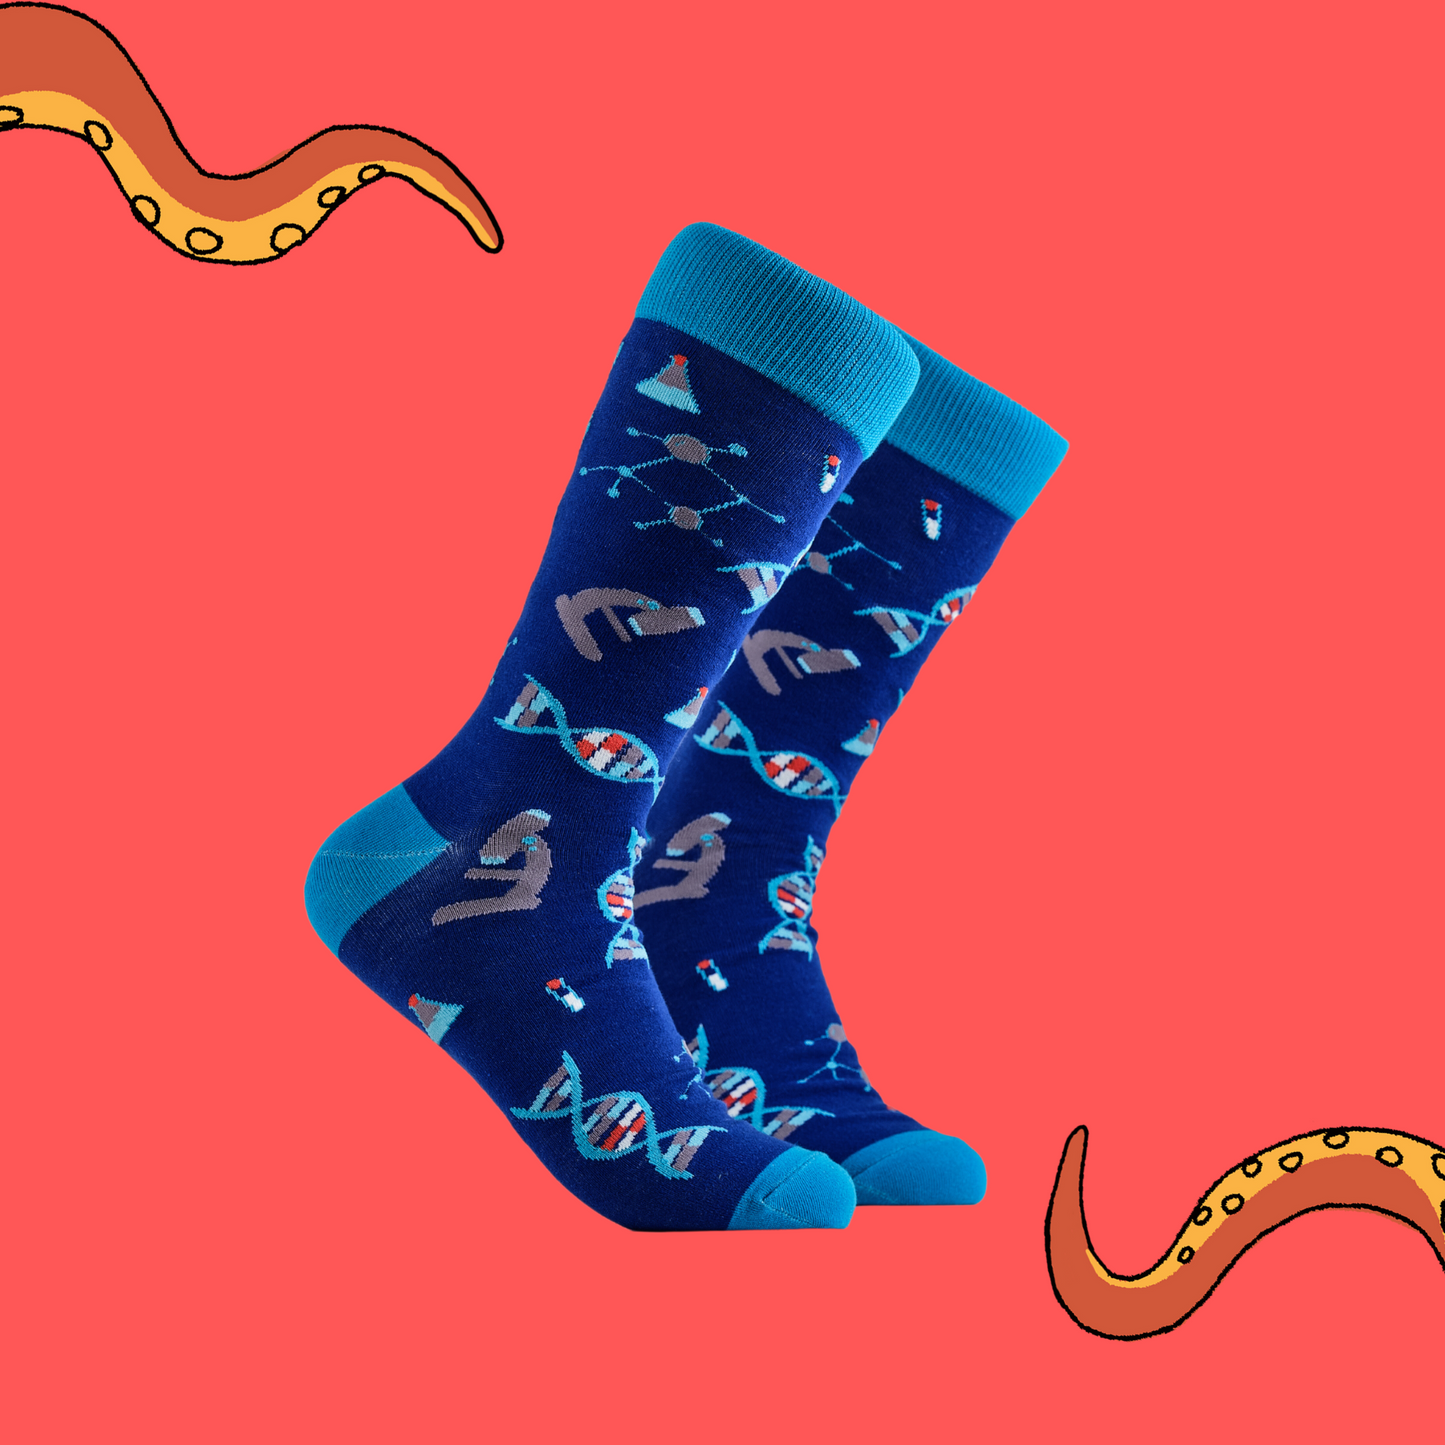 A pair of socks depicting DNA and microscopes. Blue legs, light blue cuff, heel and toe.